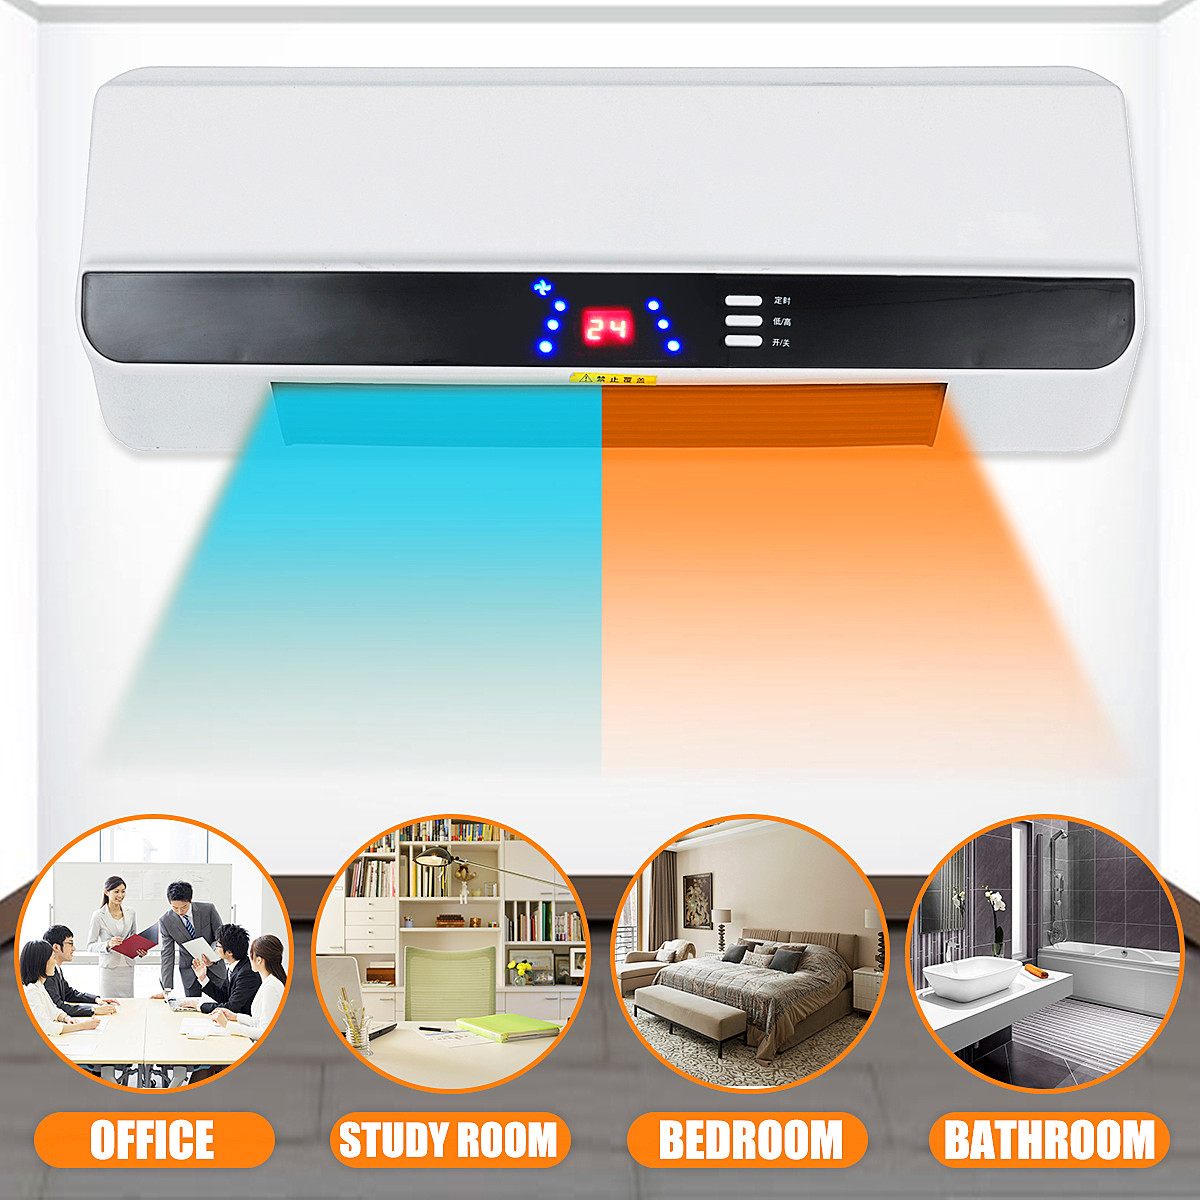 Wall Mounted Air Conditioner LED Display Electric Heater Fan Household PTC Remote Control Timer Waterproof 3 Gear Warmer 220V